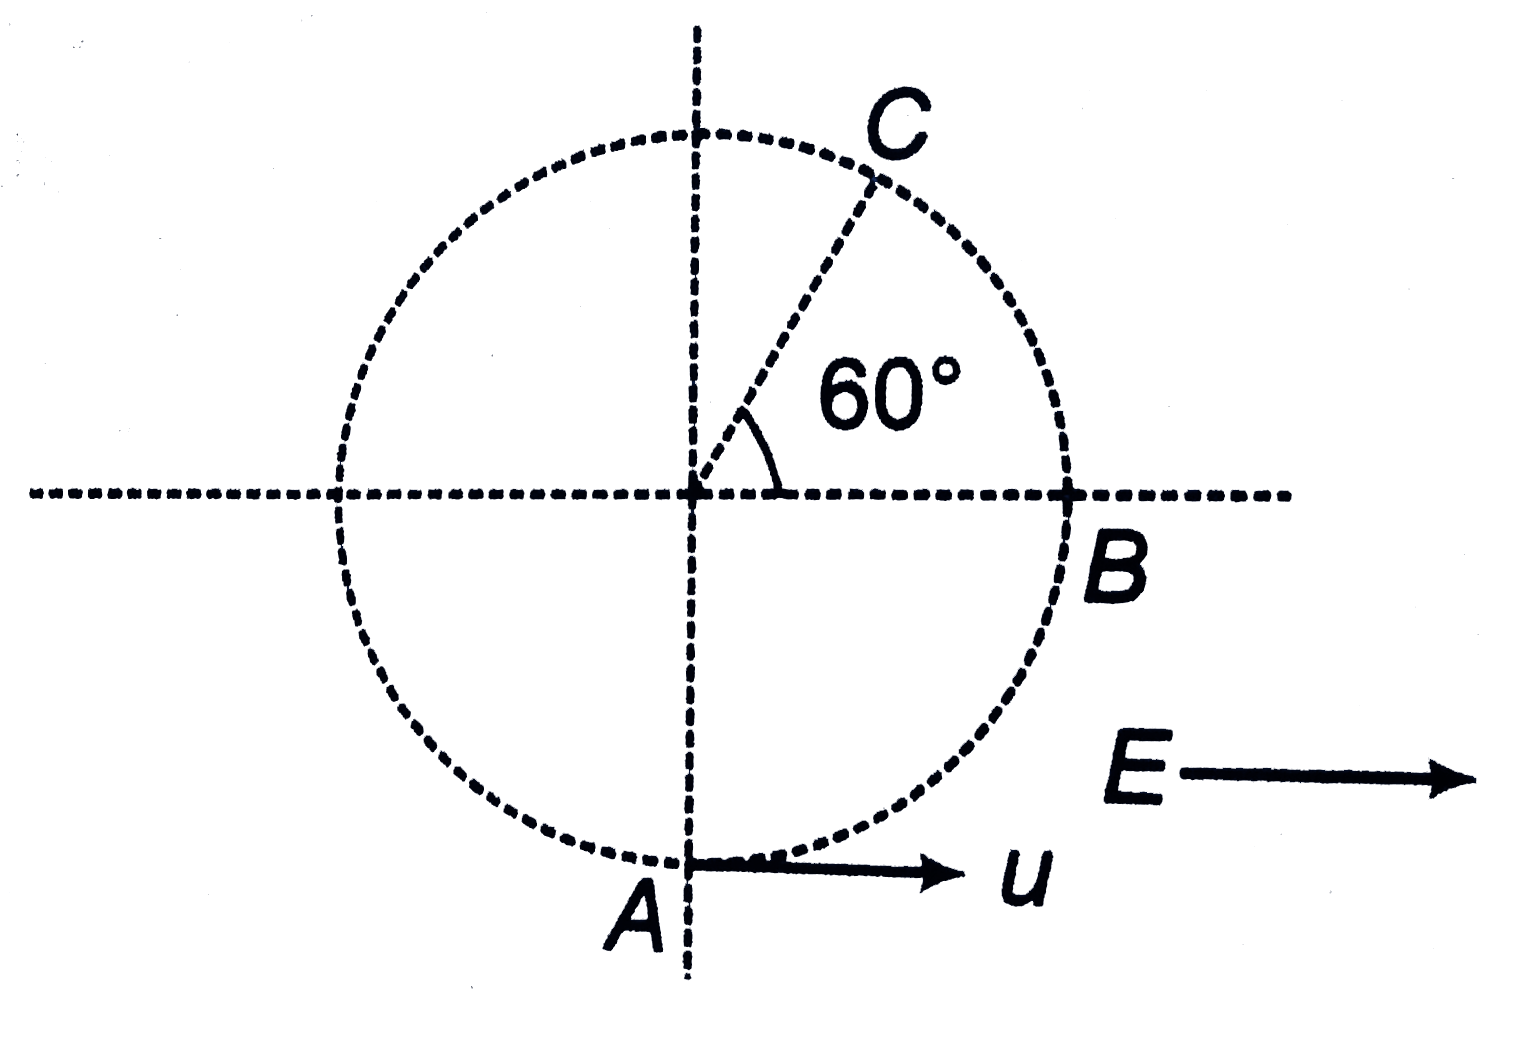 A simple pendulum with a bob of mass m = 1 kg, charge q = 5muC and string length imis given a horizontal velocity a in a uniform electric field E = 2 xx 10^6 V/m at its bottommost point A, as shown in figure. It is given that the speed a is such that the particle leaves the circle at point C. Find the speed a (Take g = 10 m/ s^2)